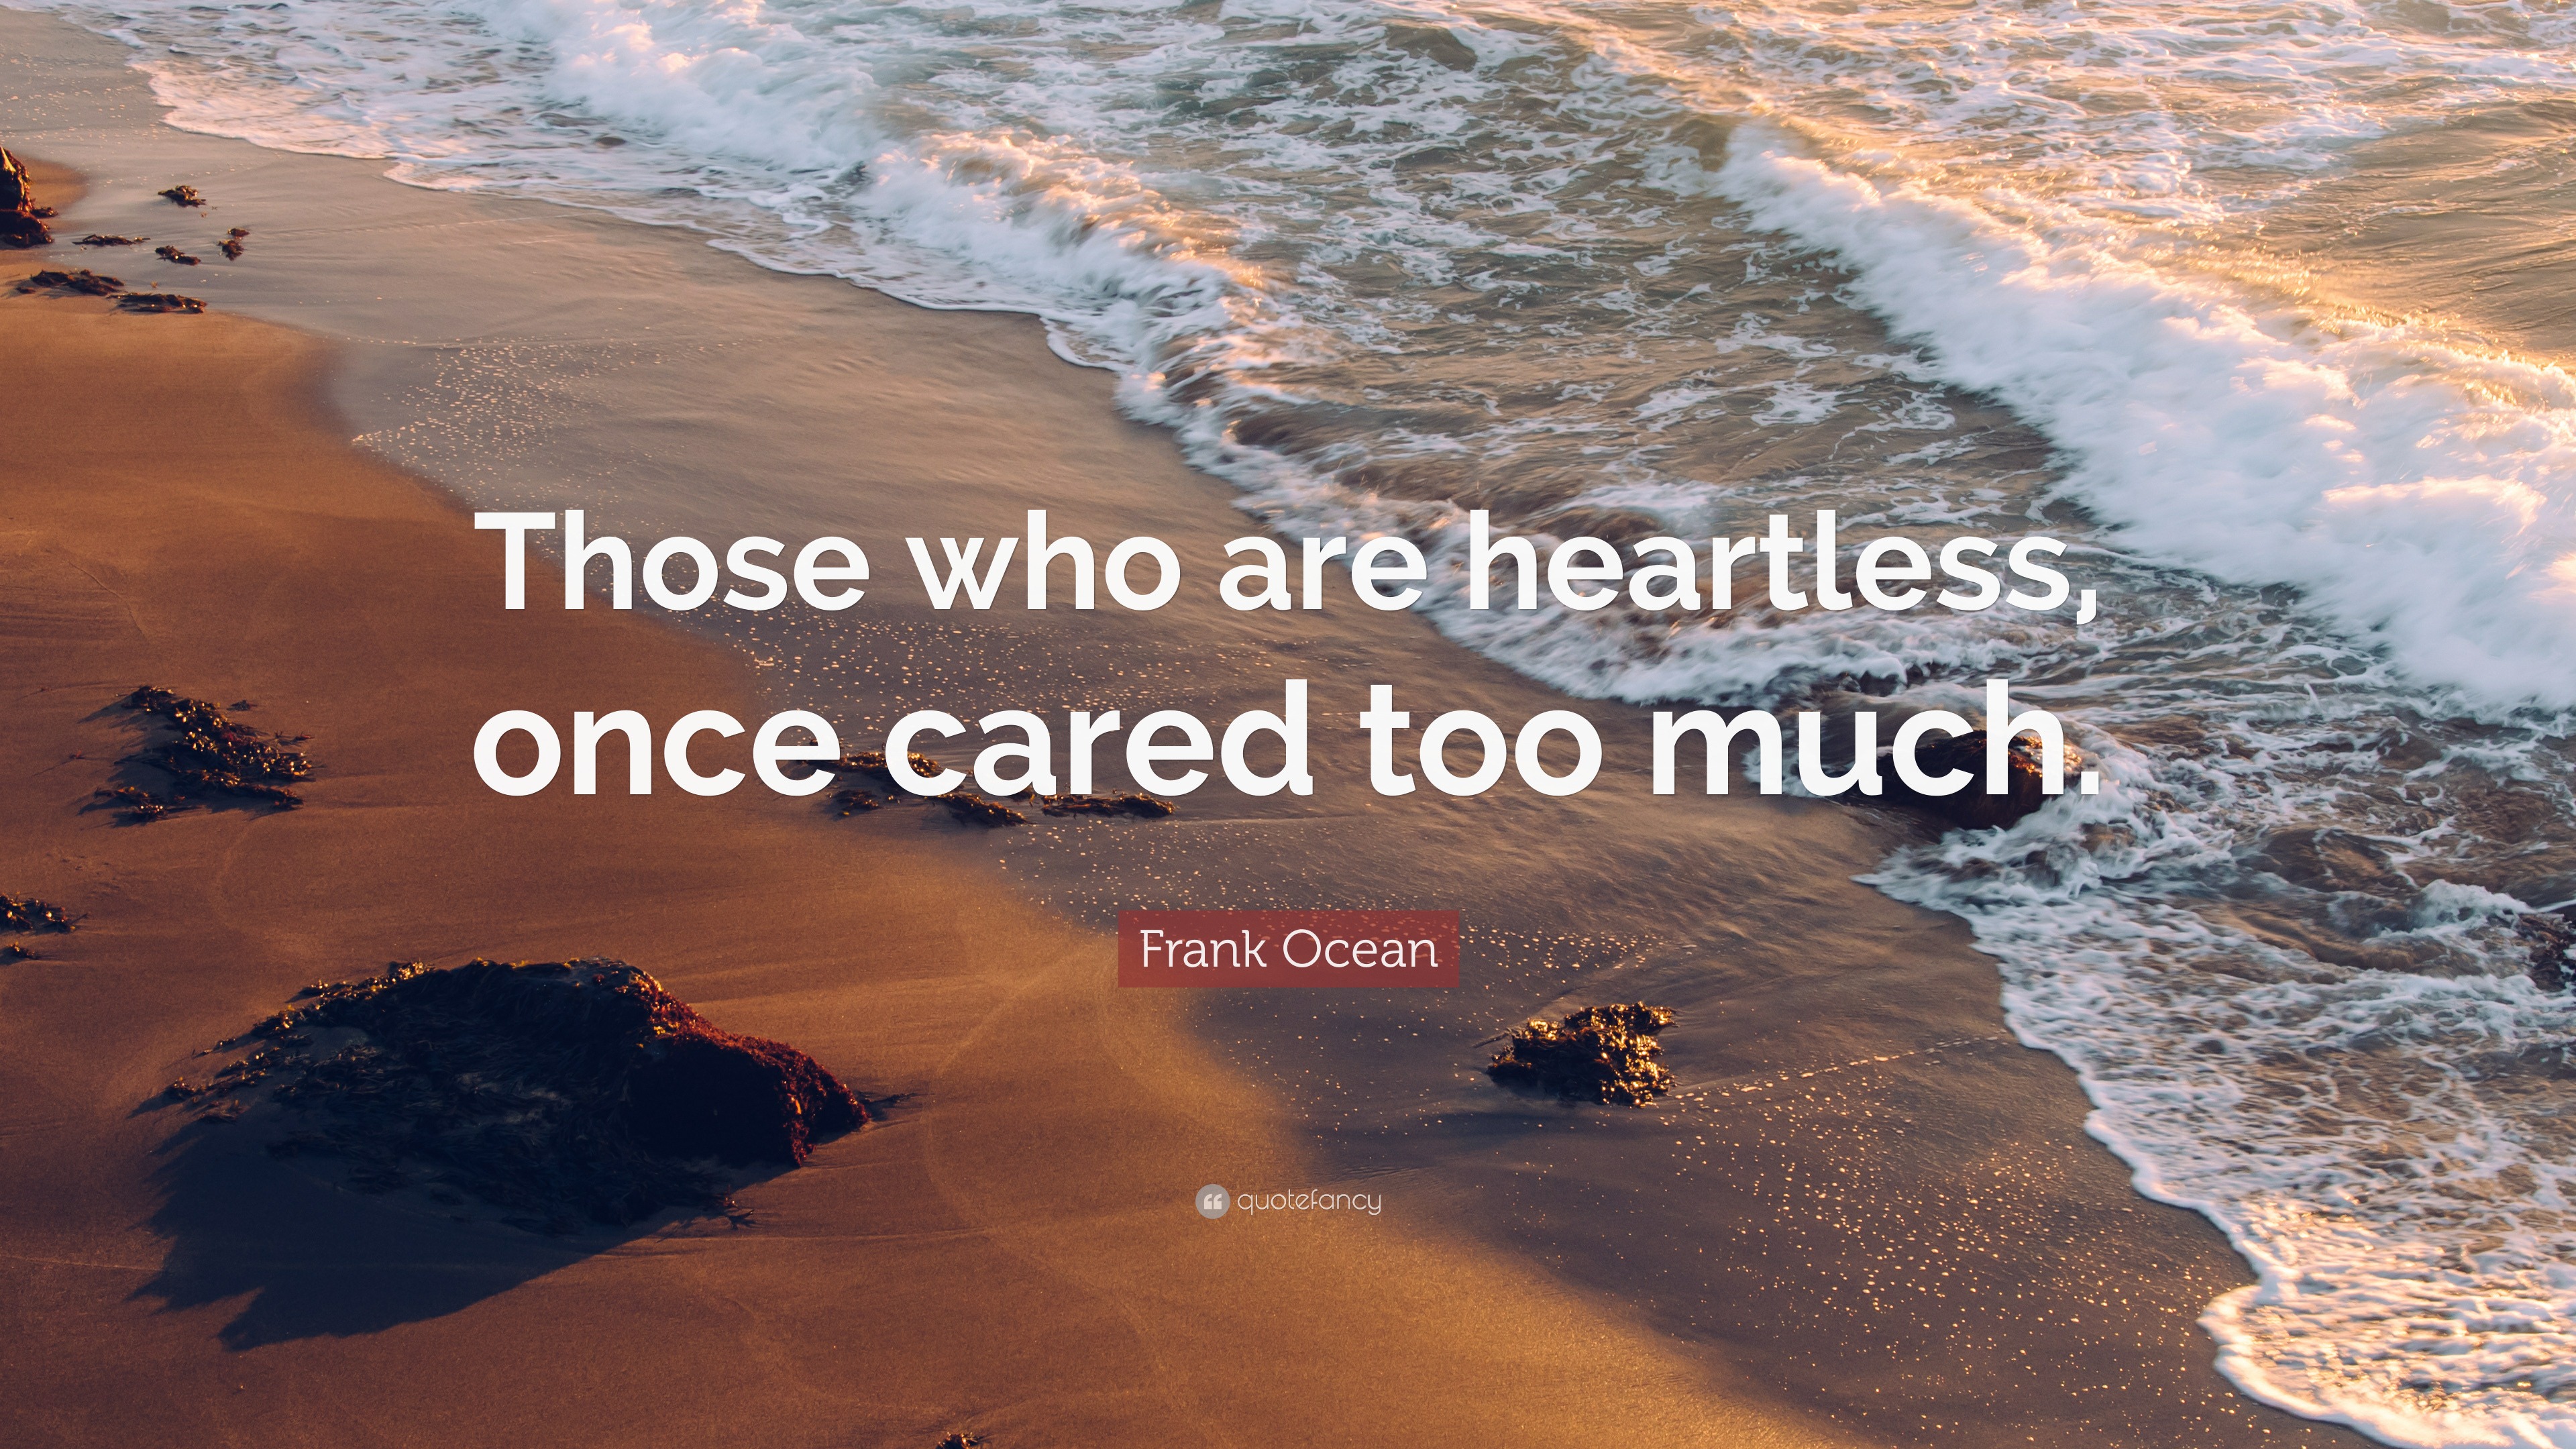 Frank Ocean Quote Those Who Are Heartless Once Cared Too Much 12 Wallpapers Quotefancy